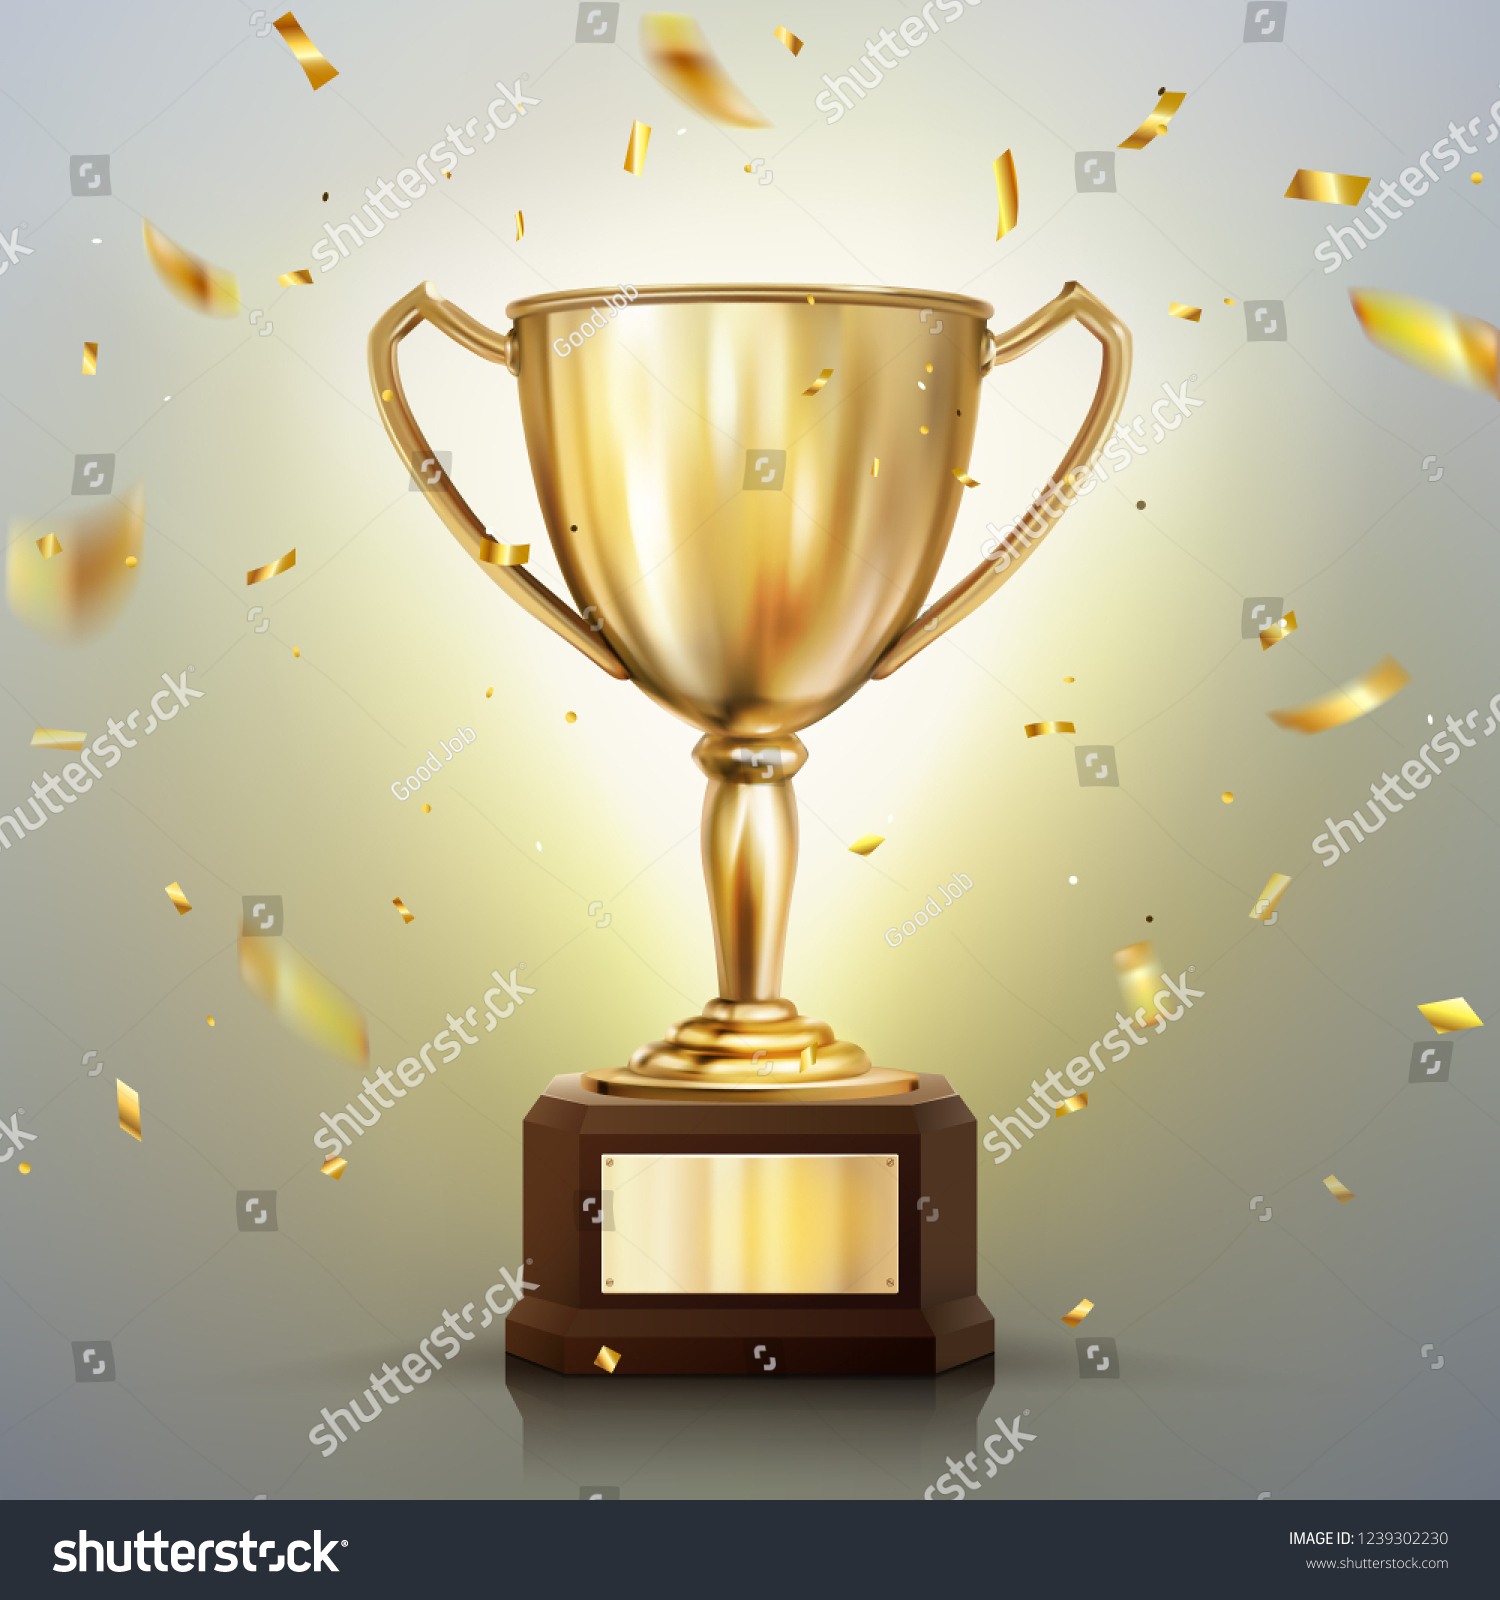 3d realistic vector golden cup isolated on white background. Championship trophy surrounded by falling confetti. Sports tournament award #1239302230